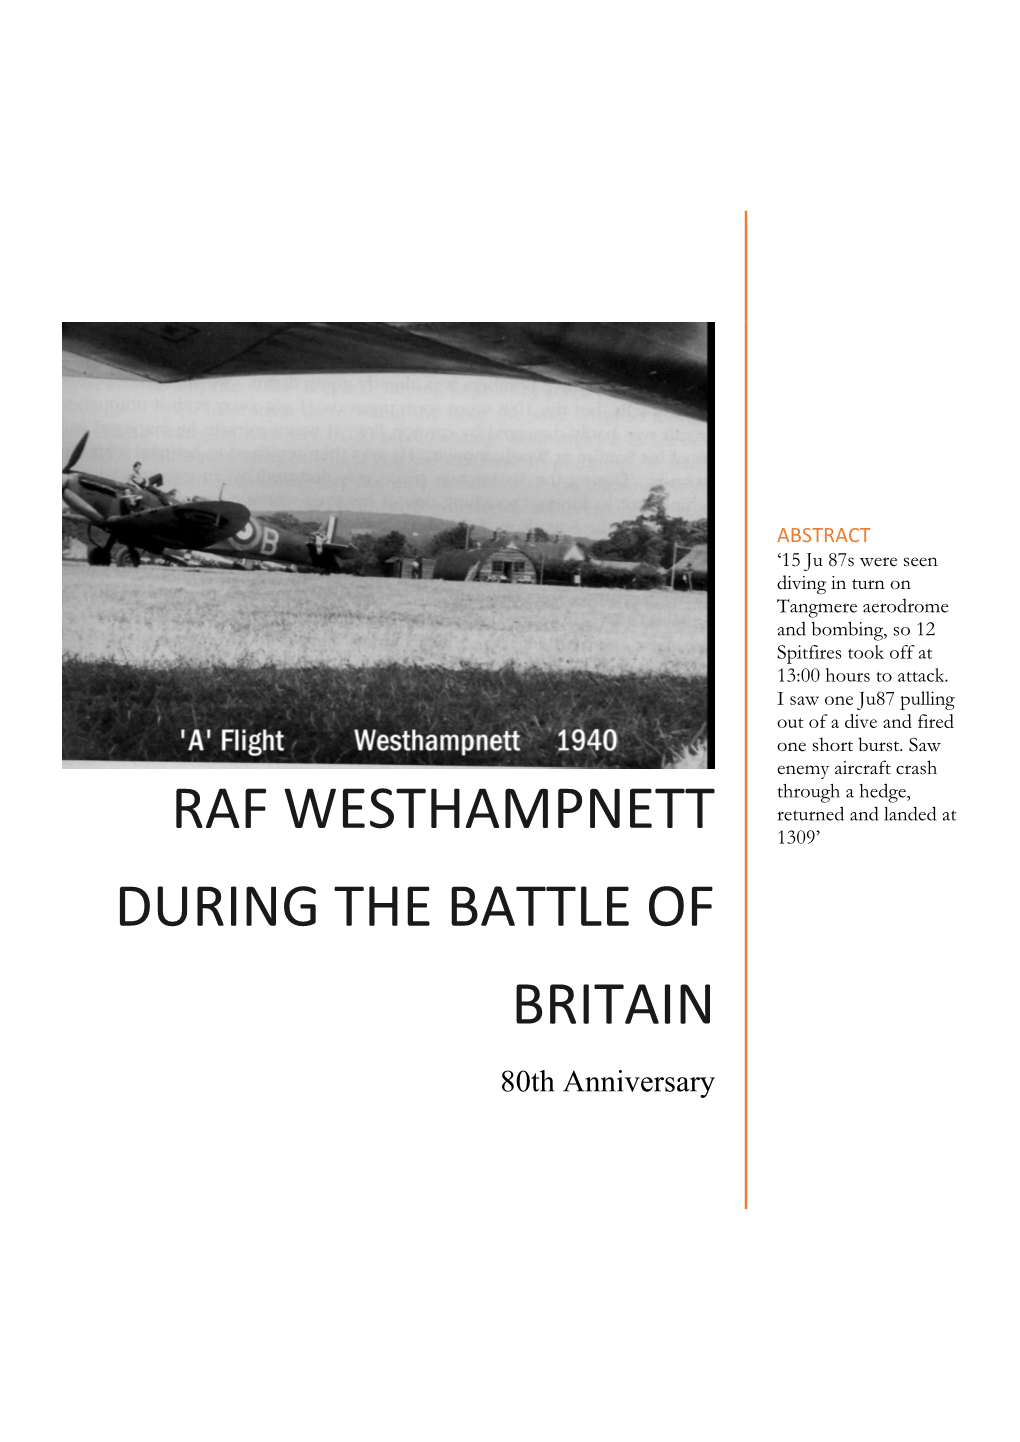 RAF Westhampnett During the Battle of Britain